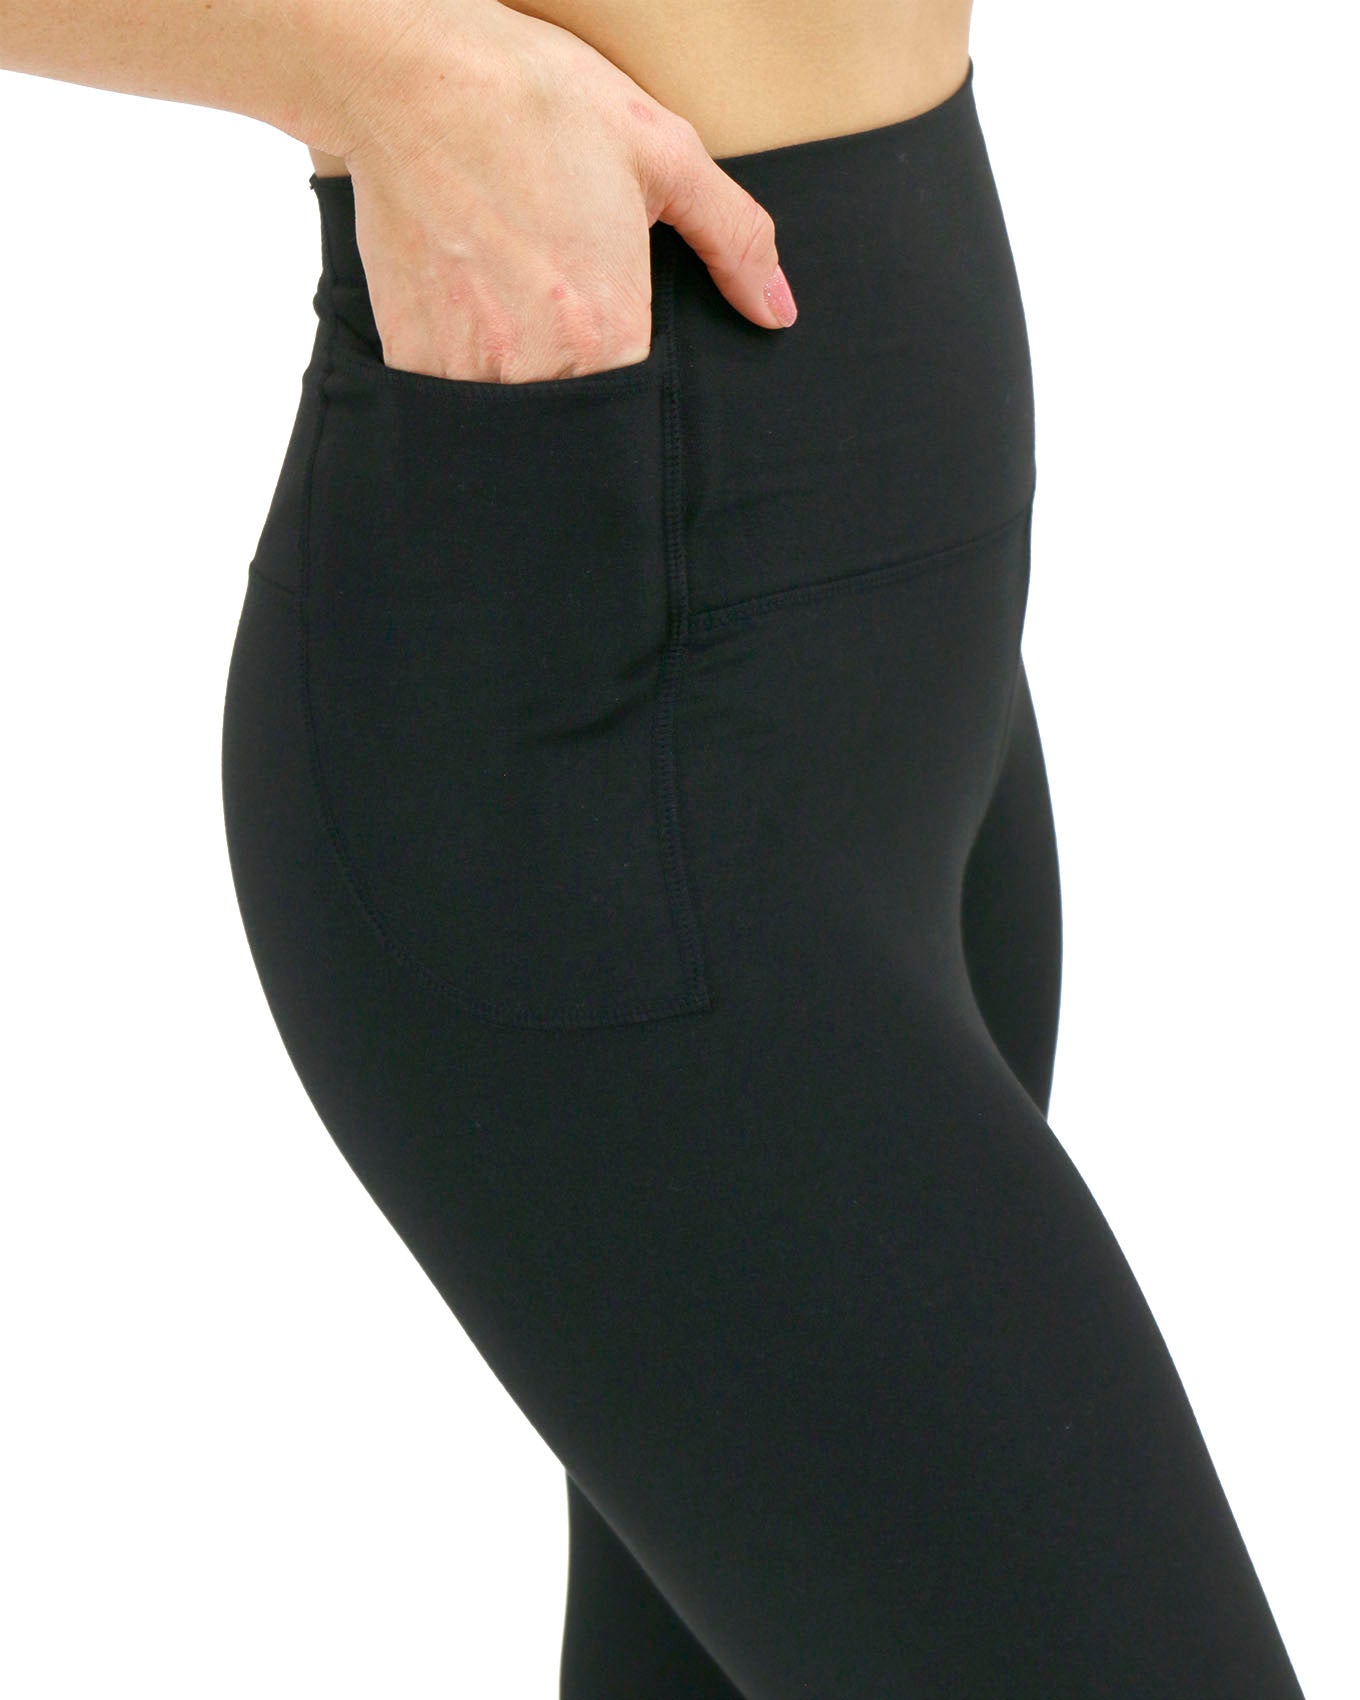 Wholesale petite leggings For Pure Comfort And Style 